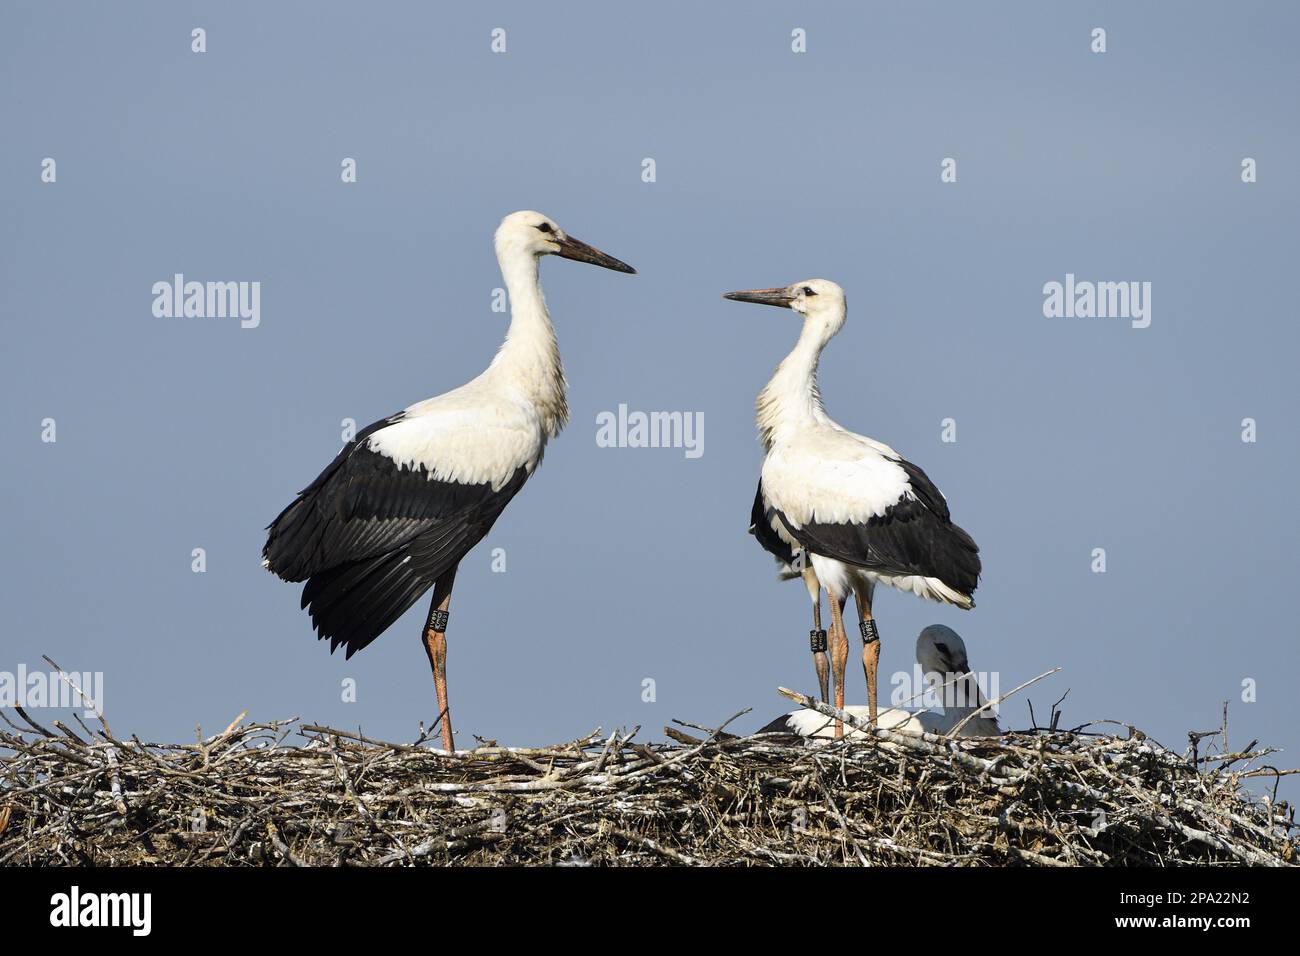 White Stork (Ciconia ciconia), adult and young birds in nest, two young birds threatening each other, Anholt, Lower Rhine, North Rhine-Westphalia Stock Photo